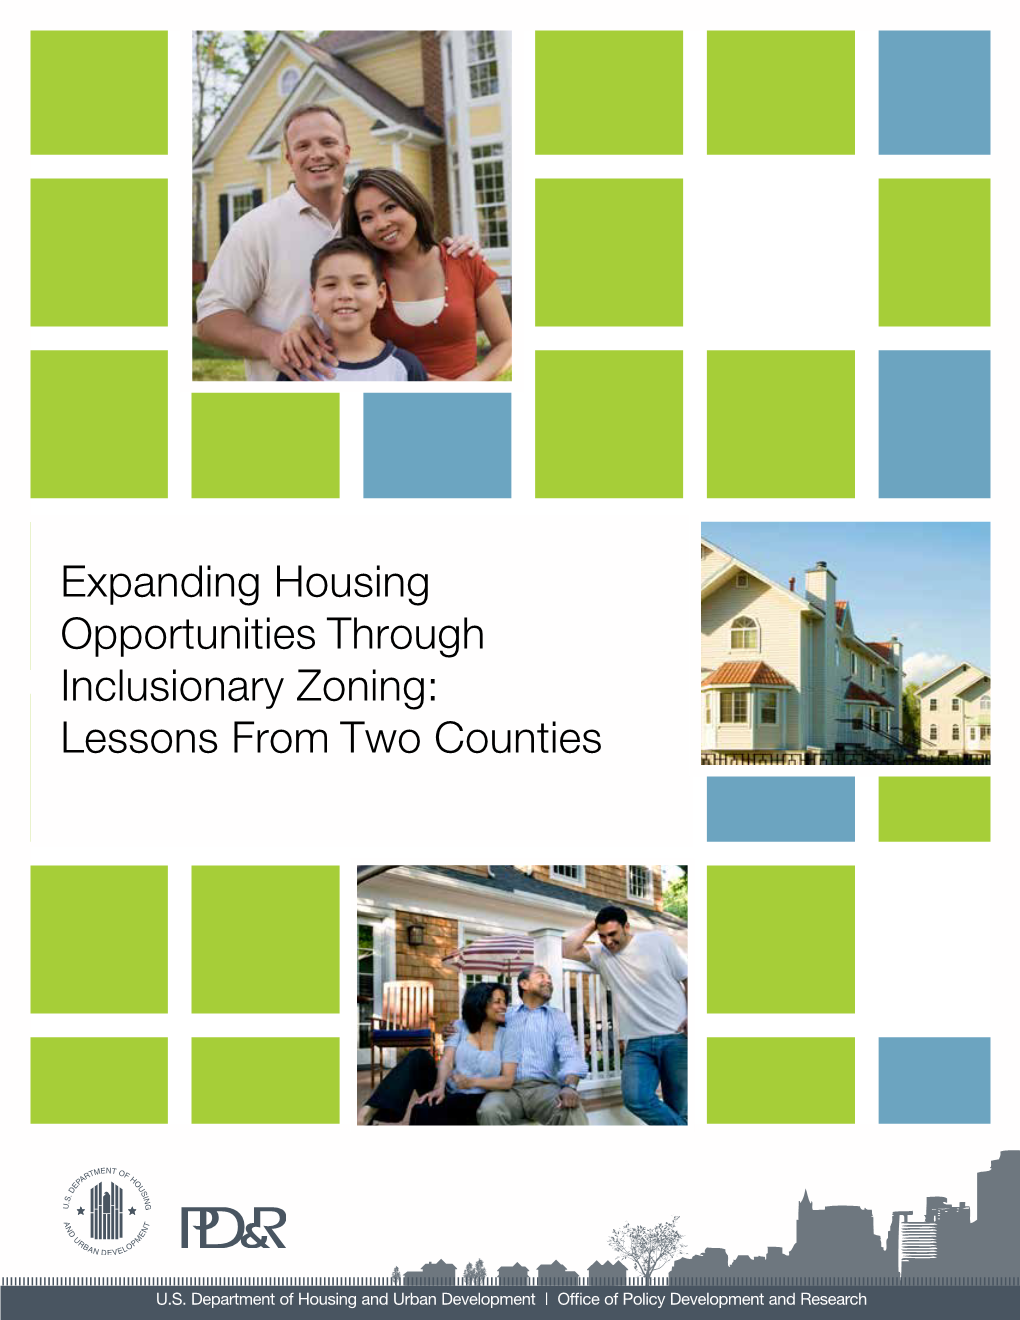 Expanding Housing Opportunities Through Inclusionary Zoning: Lessons from Two Counties